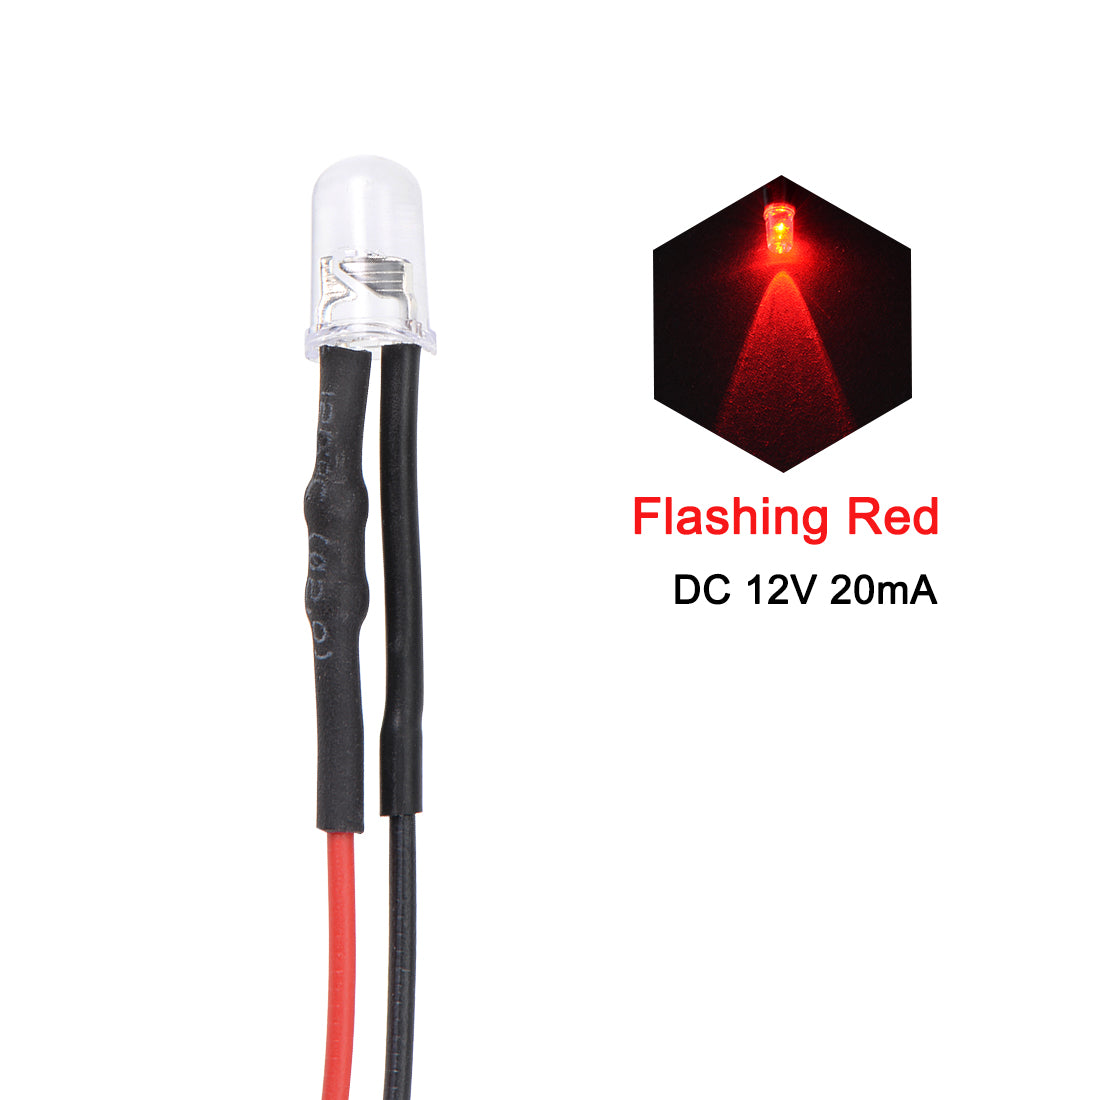 uxcell Uxcell 10Pcs DC 12V 5mm Pre Wired LED, Flashing Red Light Round Top Clear Lens, Light Emitting Diodes with Edge